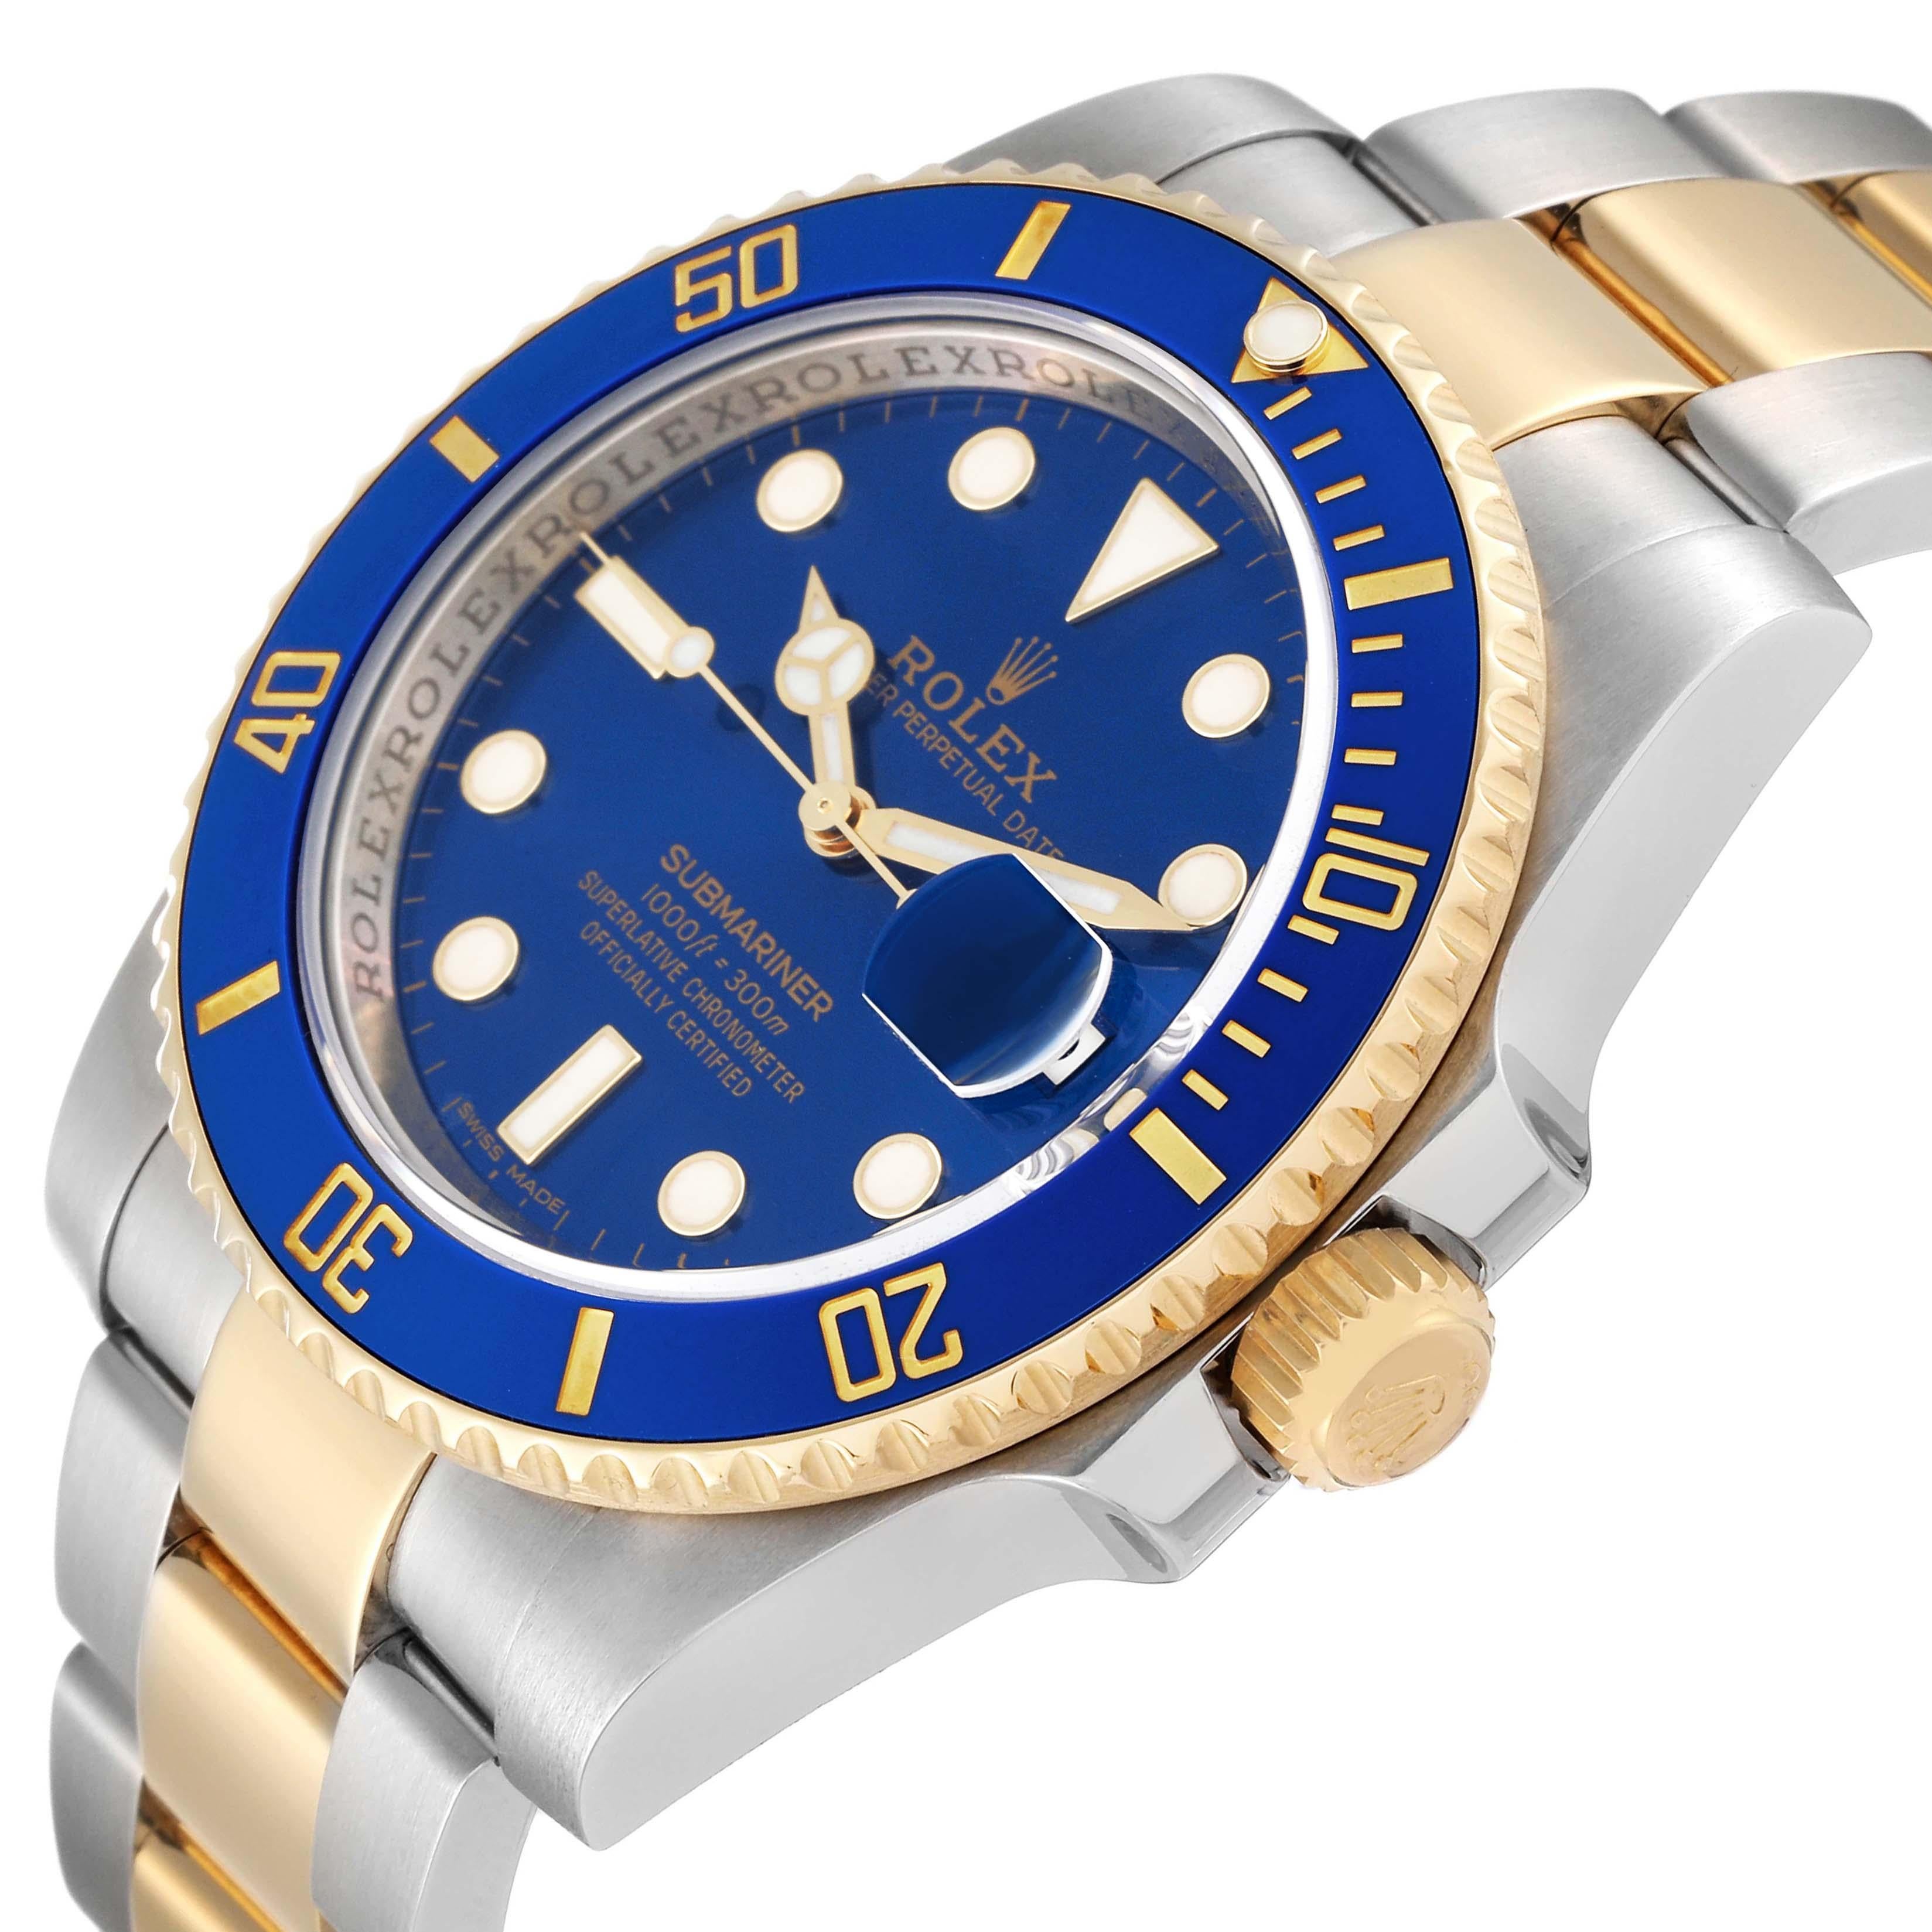 Rolex Submariner Steel Yellow Gold Blue Dial Mens Watch 116613 2